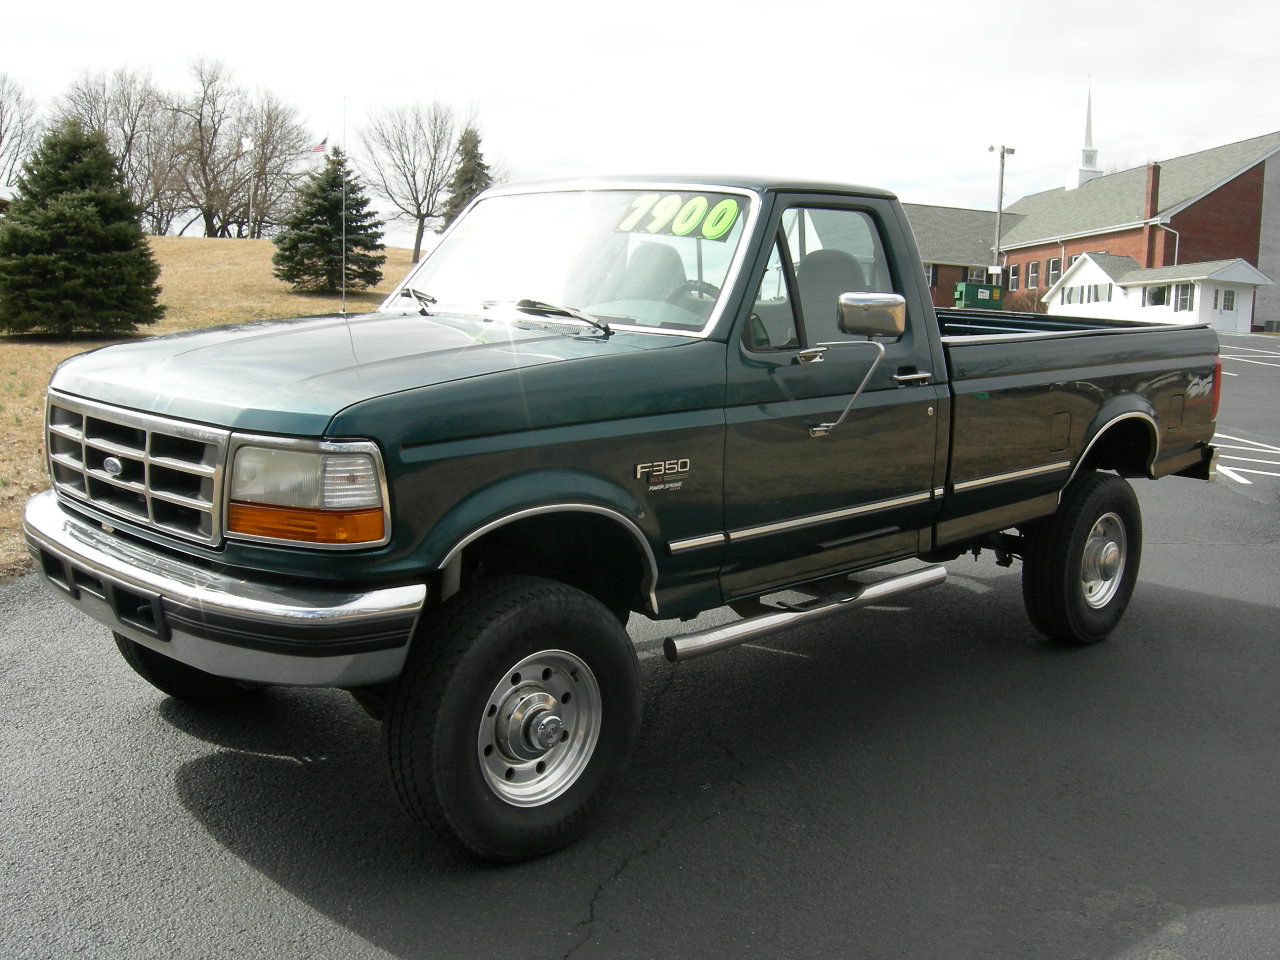 Ford powerstroke for sale in indiana